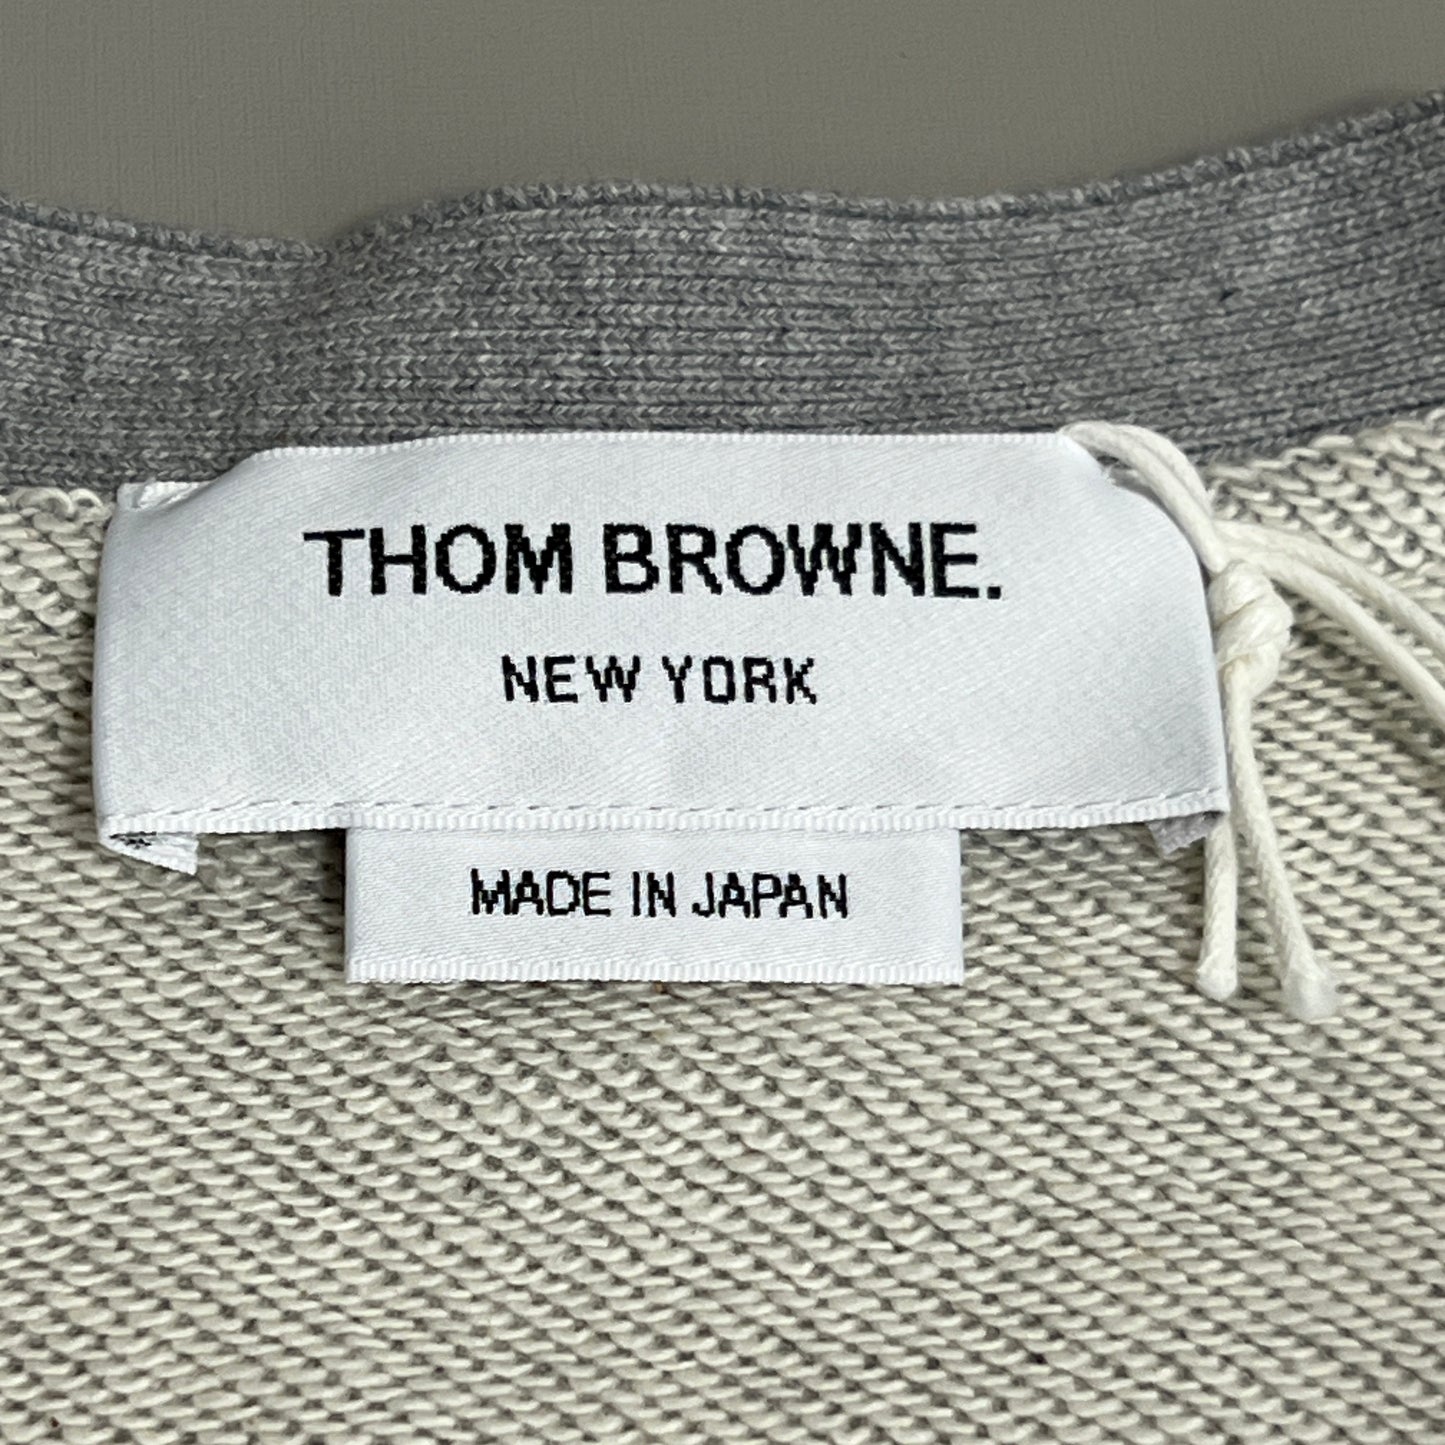 THOM BROWNE V-NECK Cardigan w/ 4Bar in Jersey Loopback Light Grey Size 1 (New)